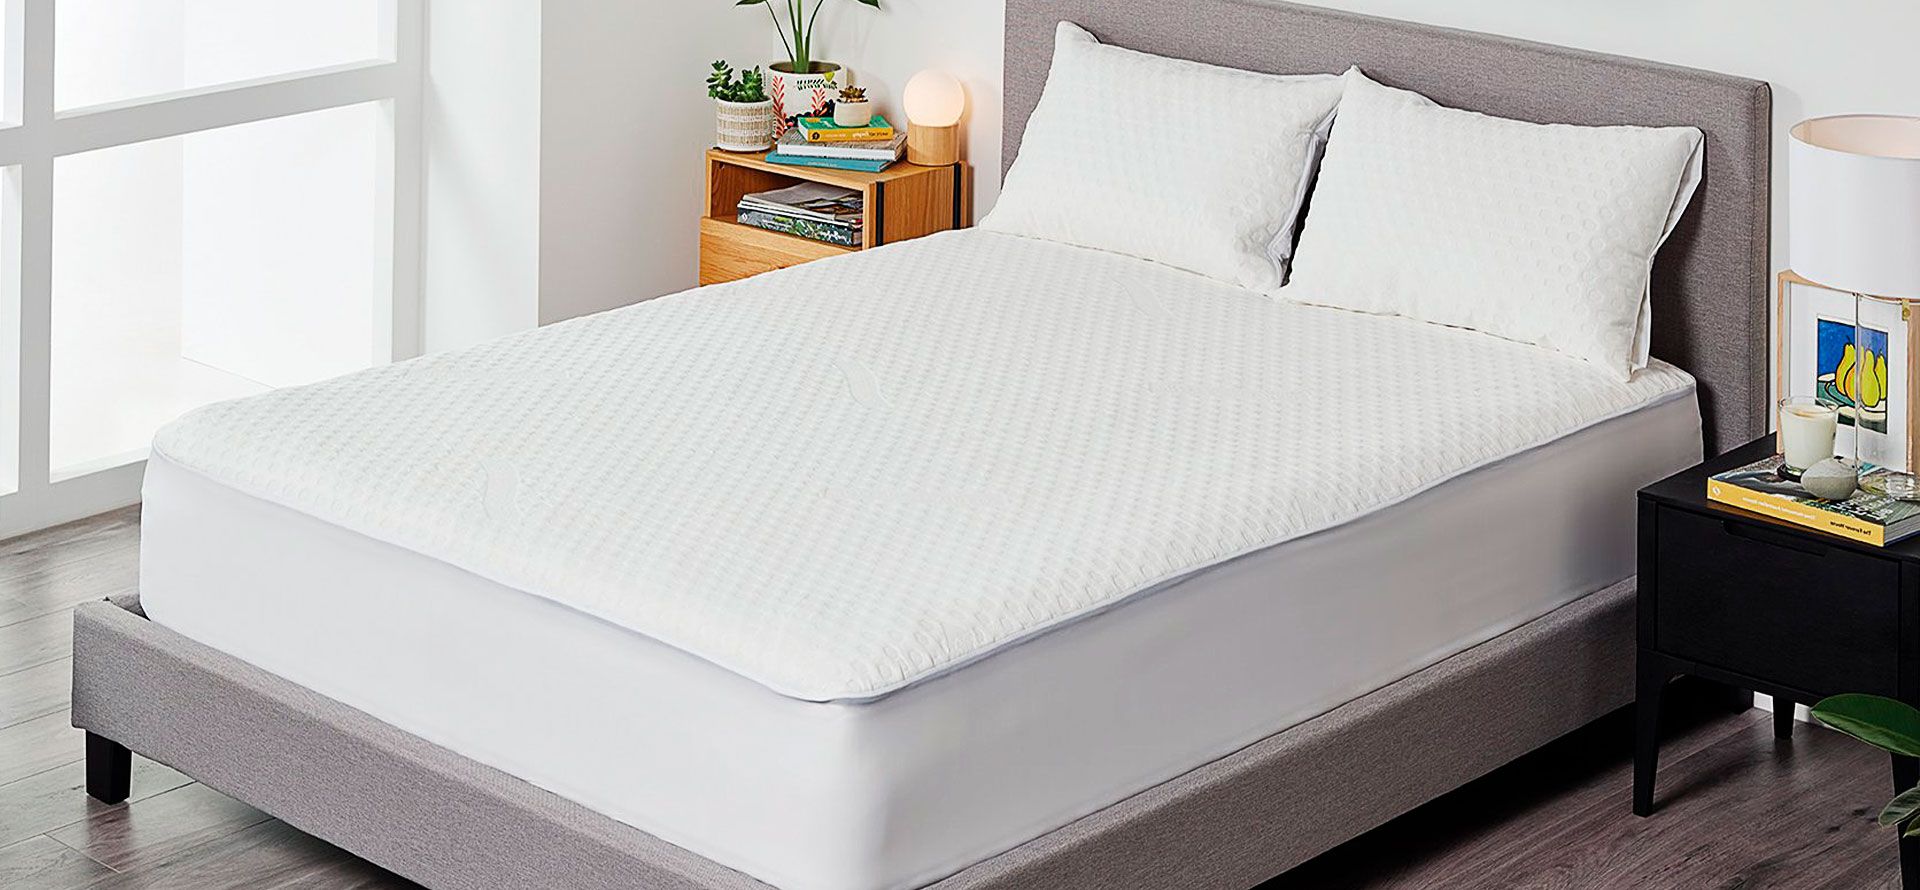 Waterproof mattress cover on the bed.